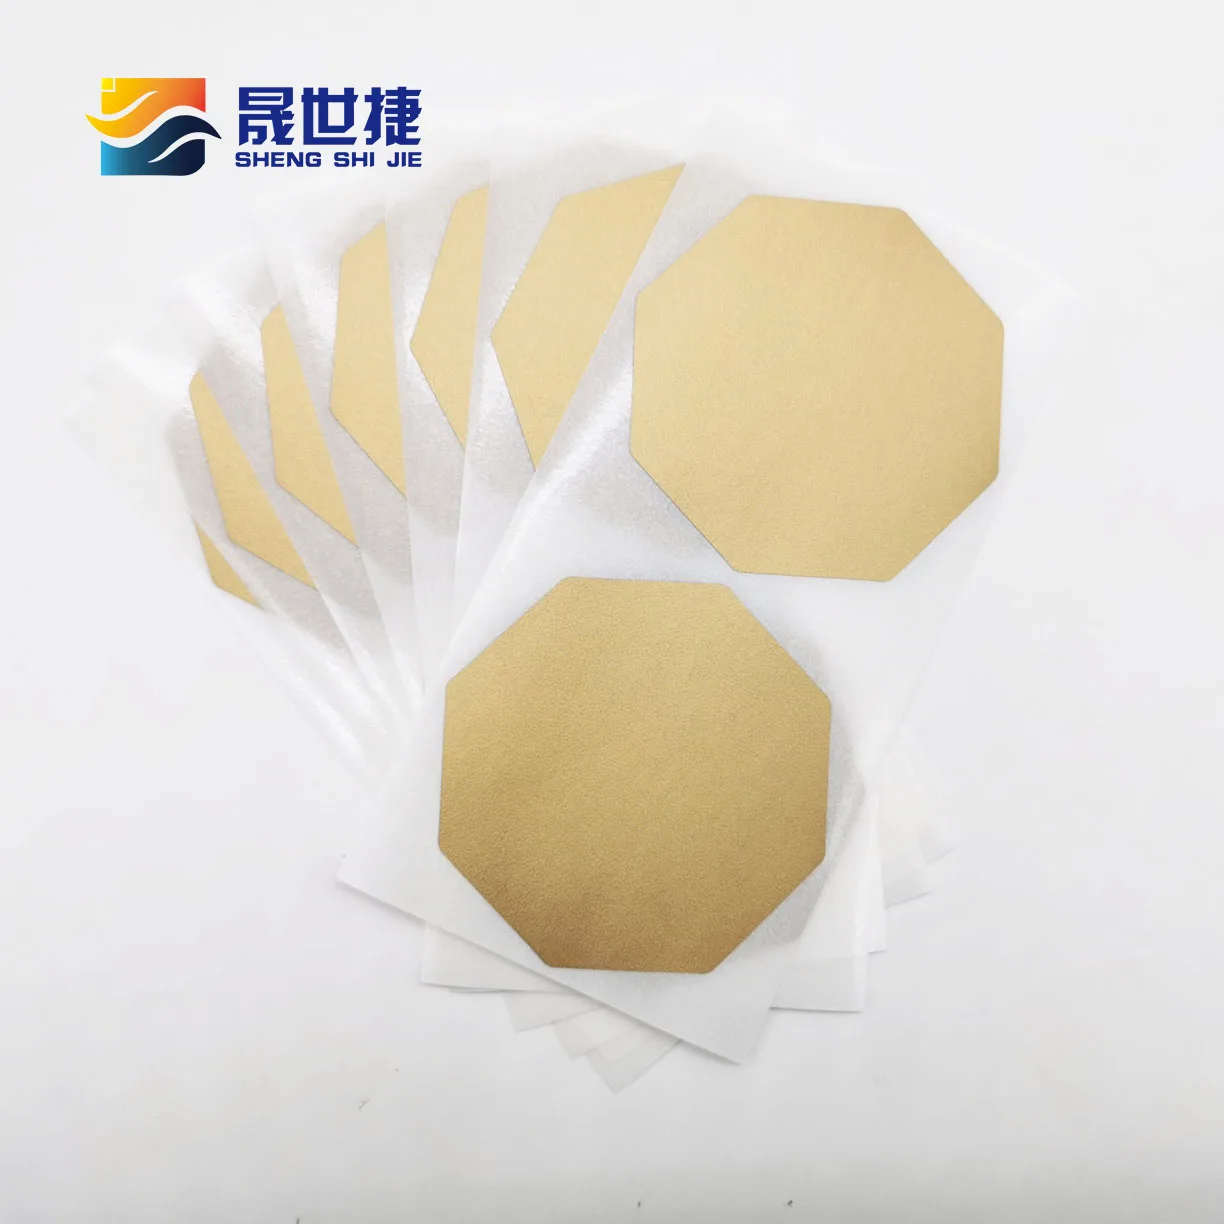 Shengshijie 2.6inch Octagon 50pcs Party Adhesive Scratch Stickers For Diy Card Party Wedding Engagement Game